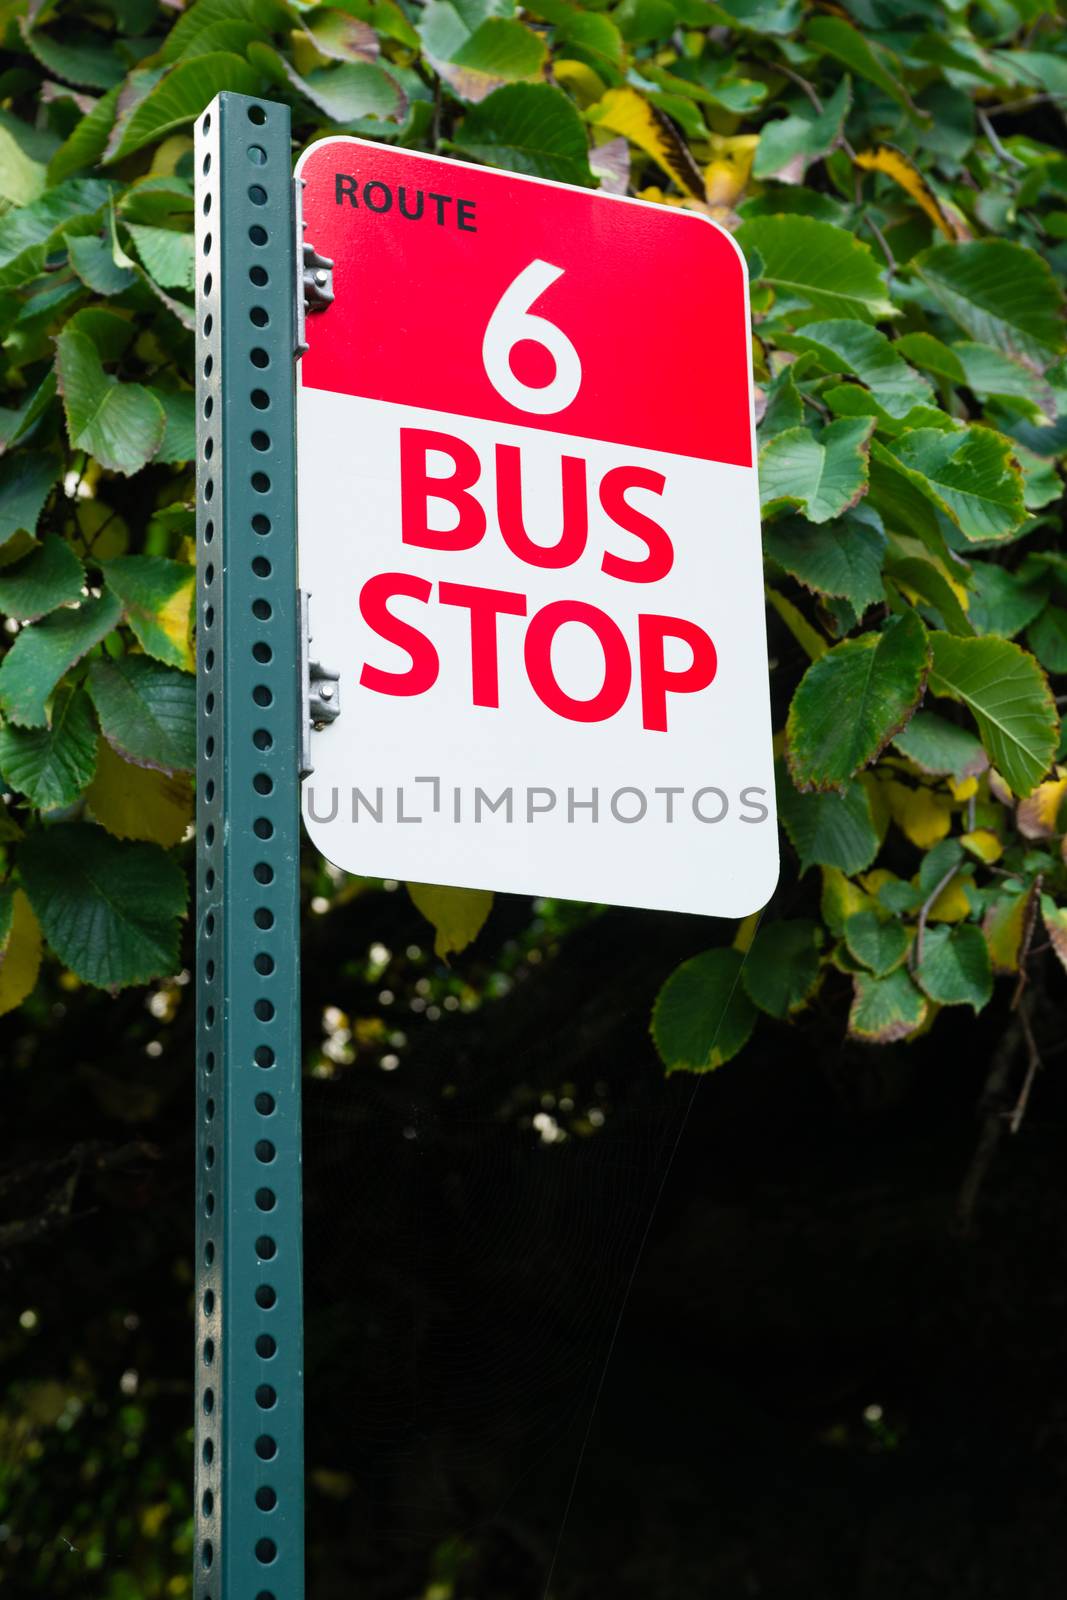 Bus Stop Route 6 Public Transit Downtown City Transportation by ChrisBoswell